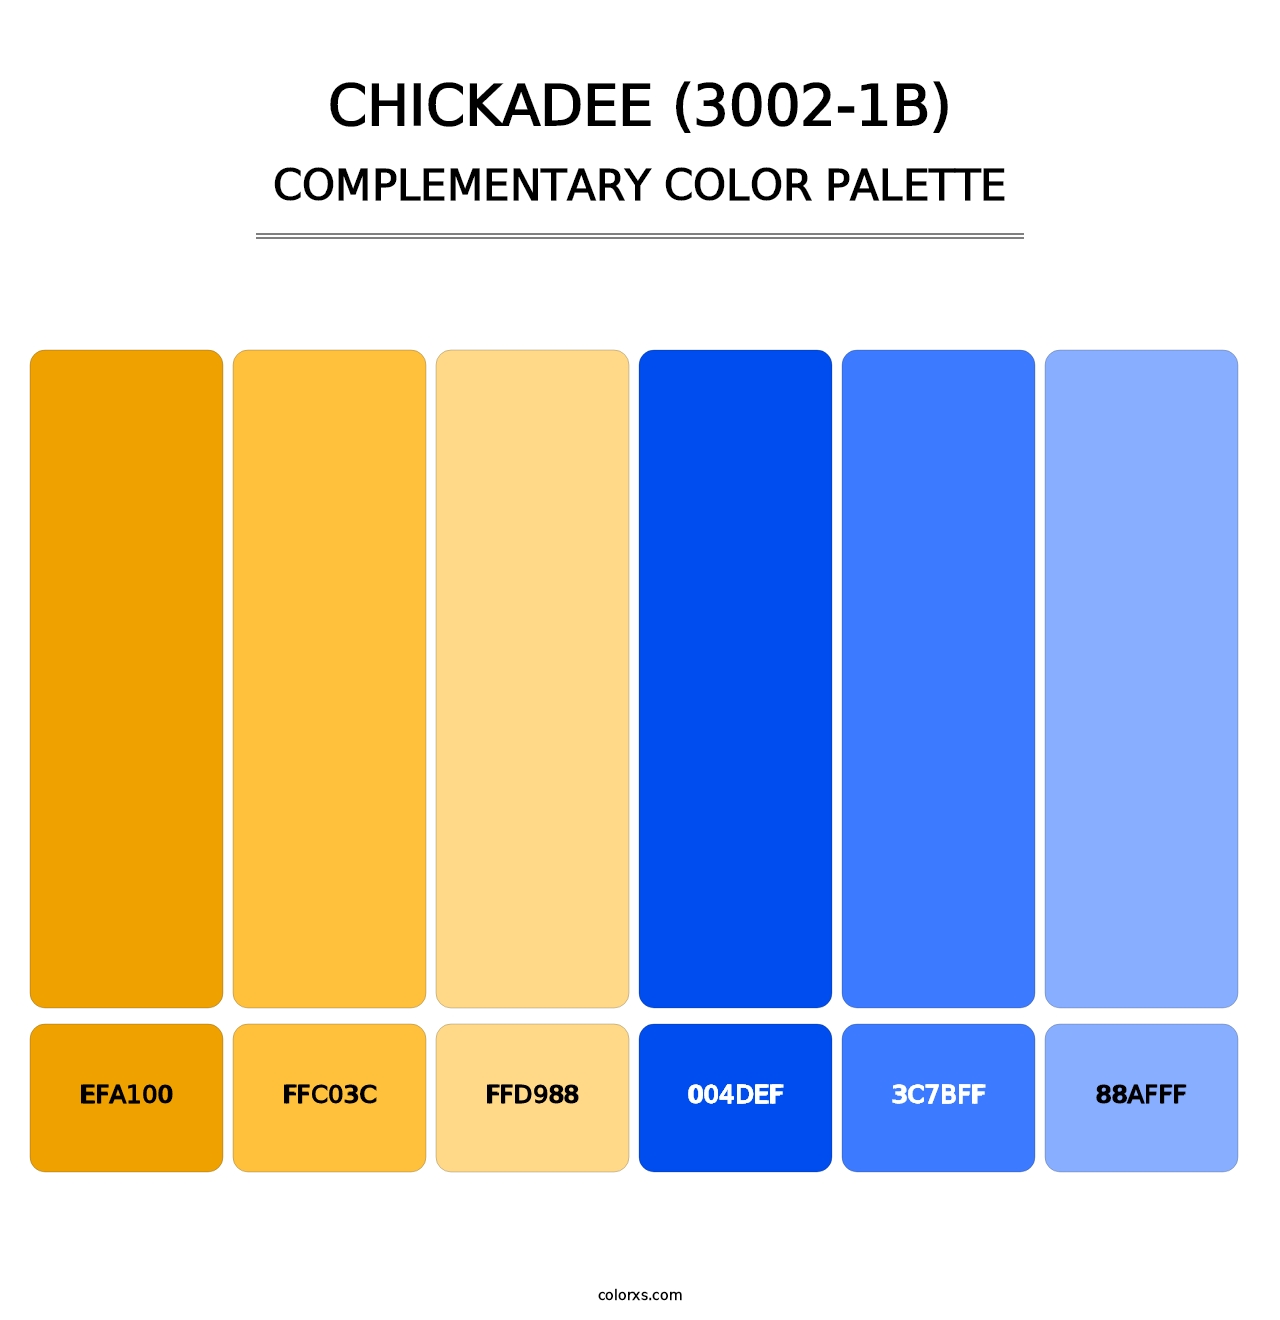 Chickadee (3002-1B) - Complementary Color Palette